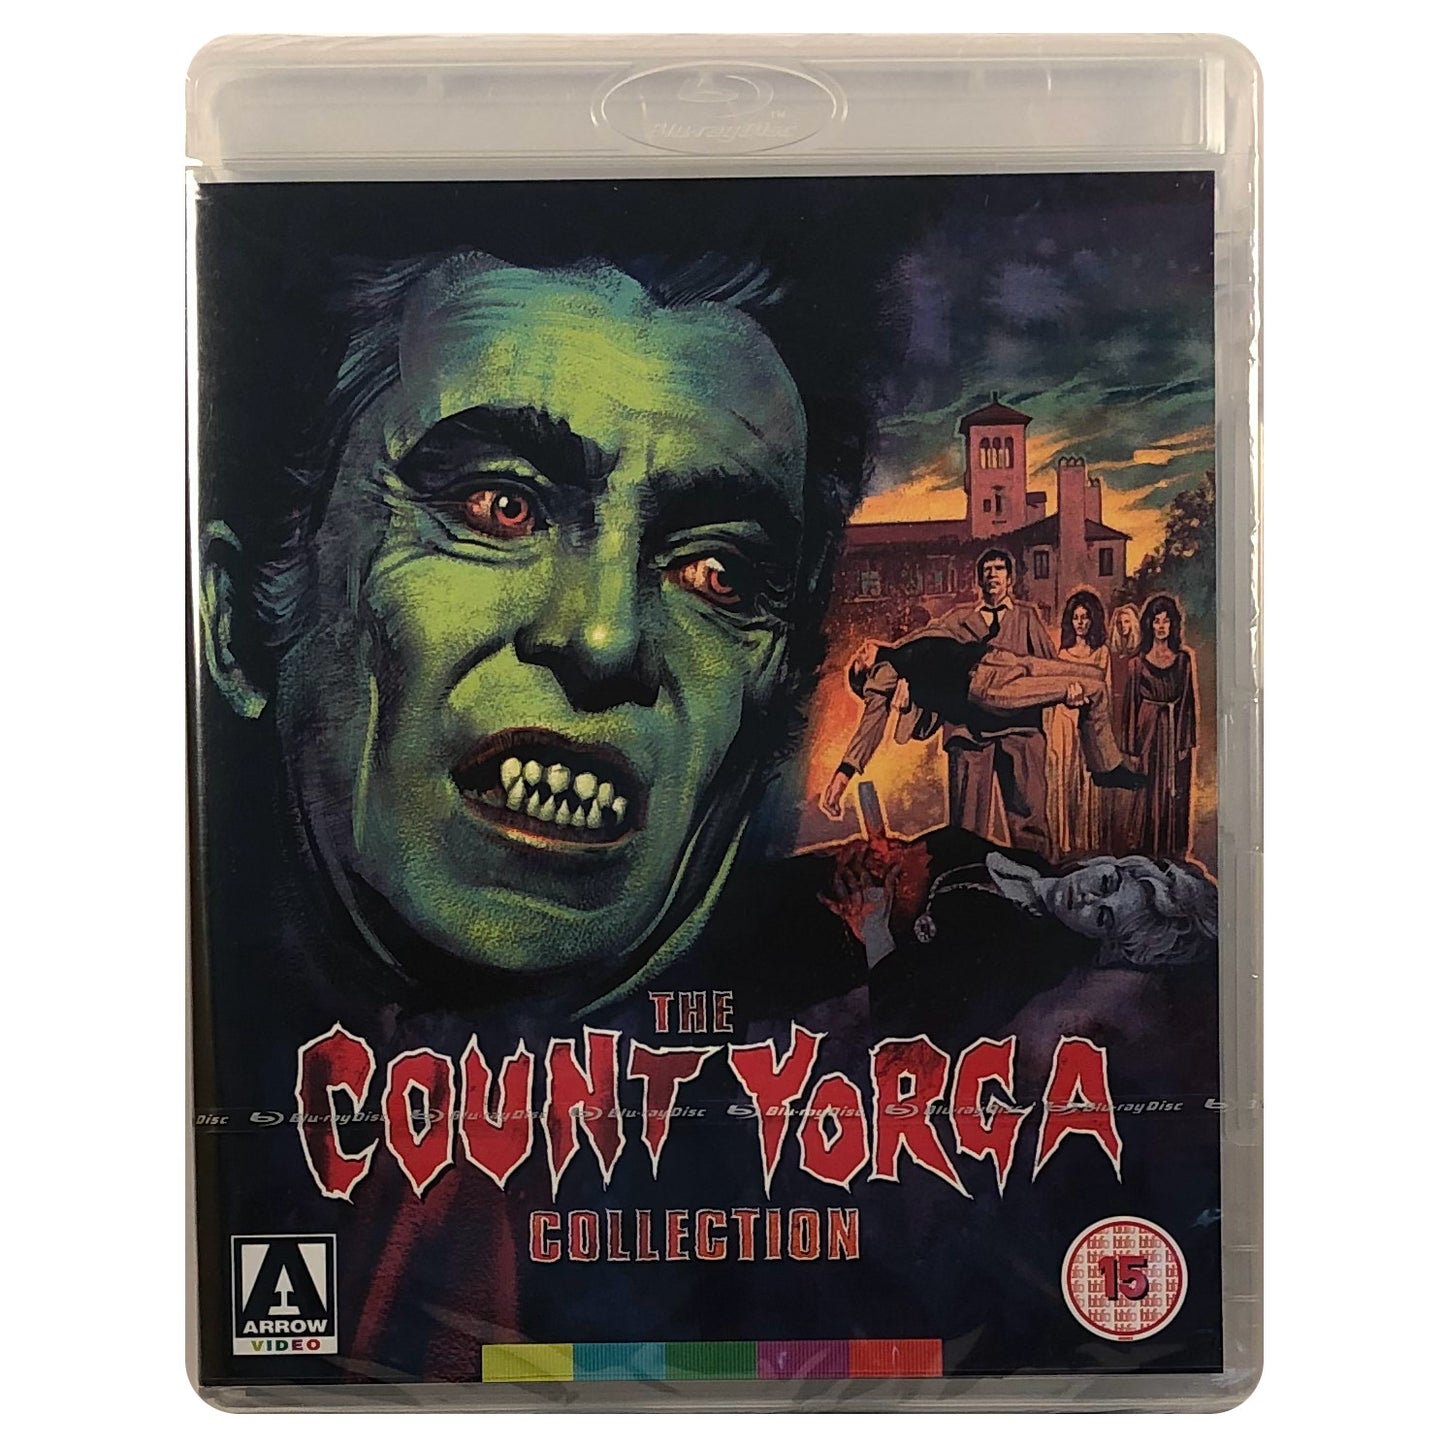 The Count Yorga Collection Blu-Ray